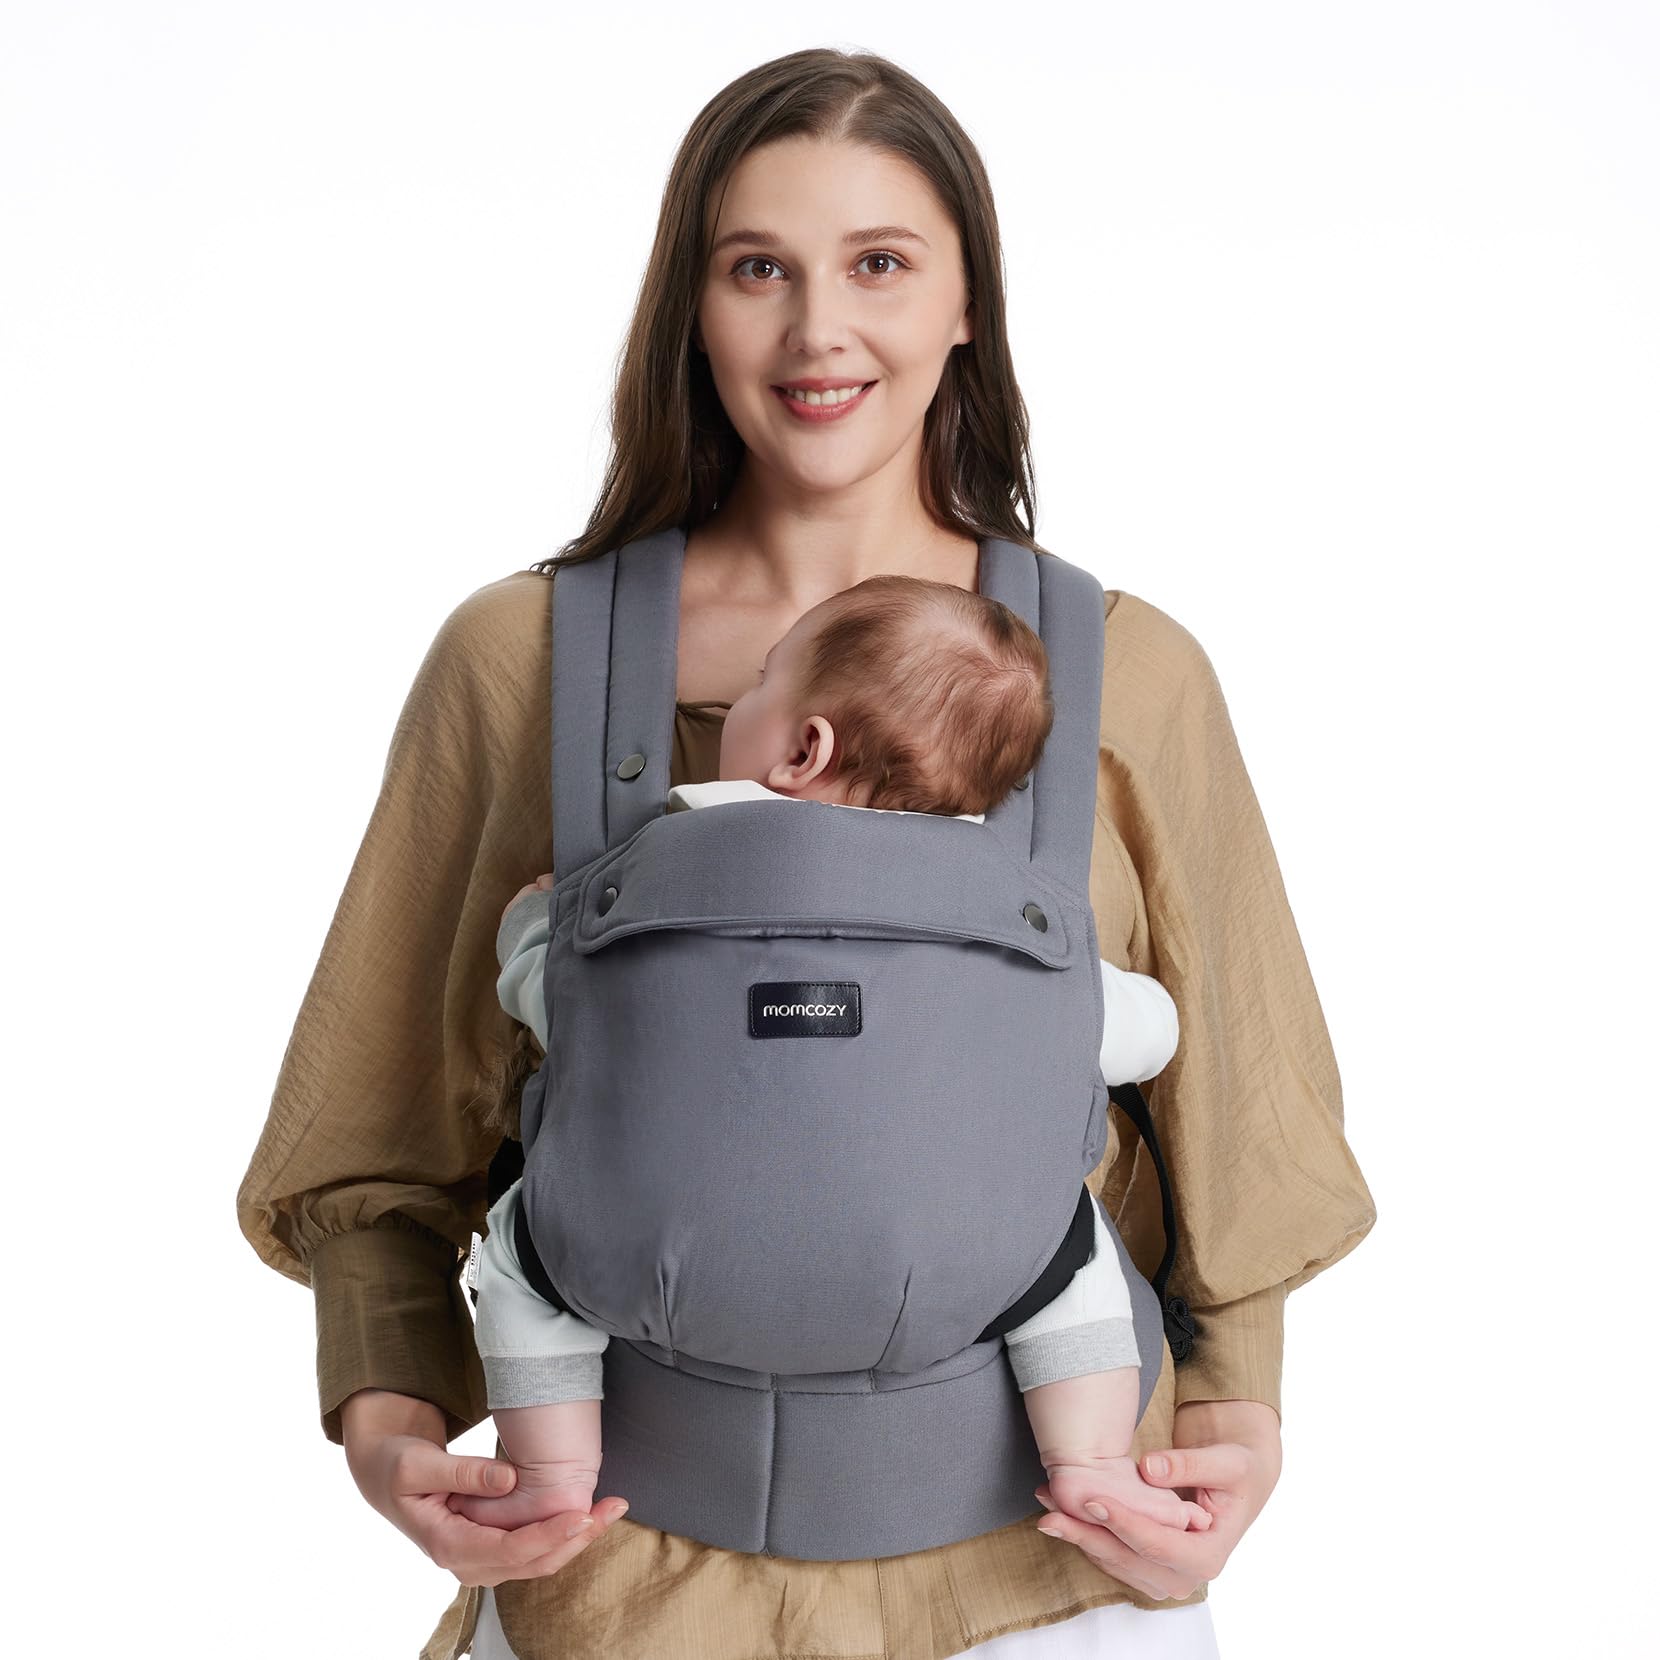 Momcozy Nursing Pillow for Breastfeeding with Baby Carrier Newborn to  Toddler